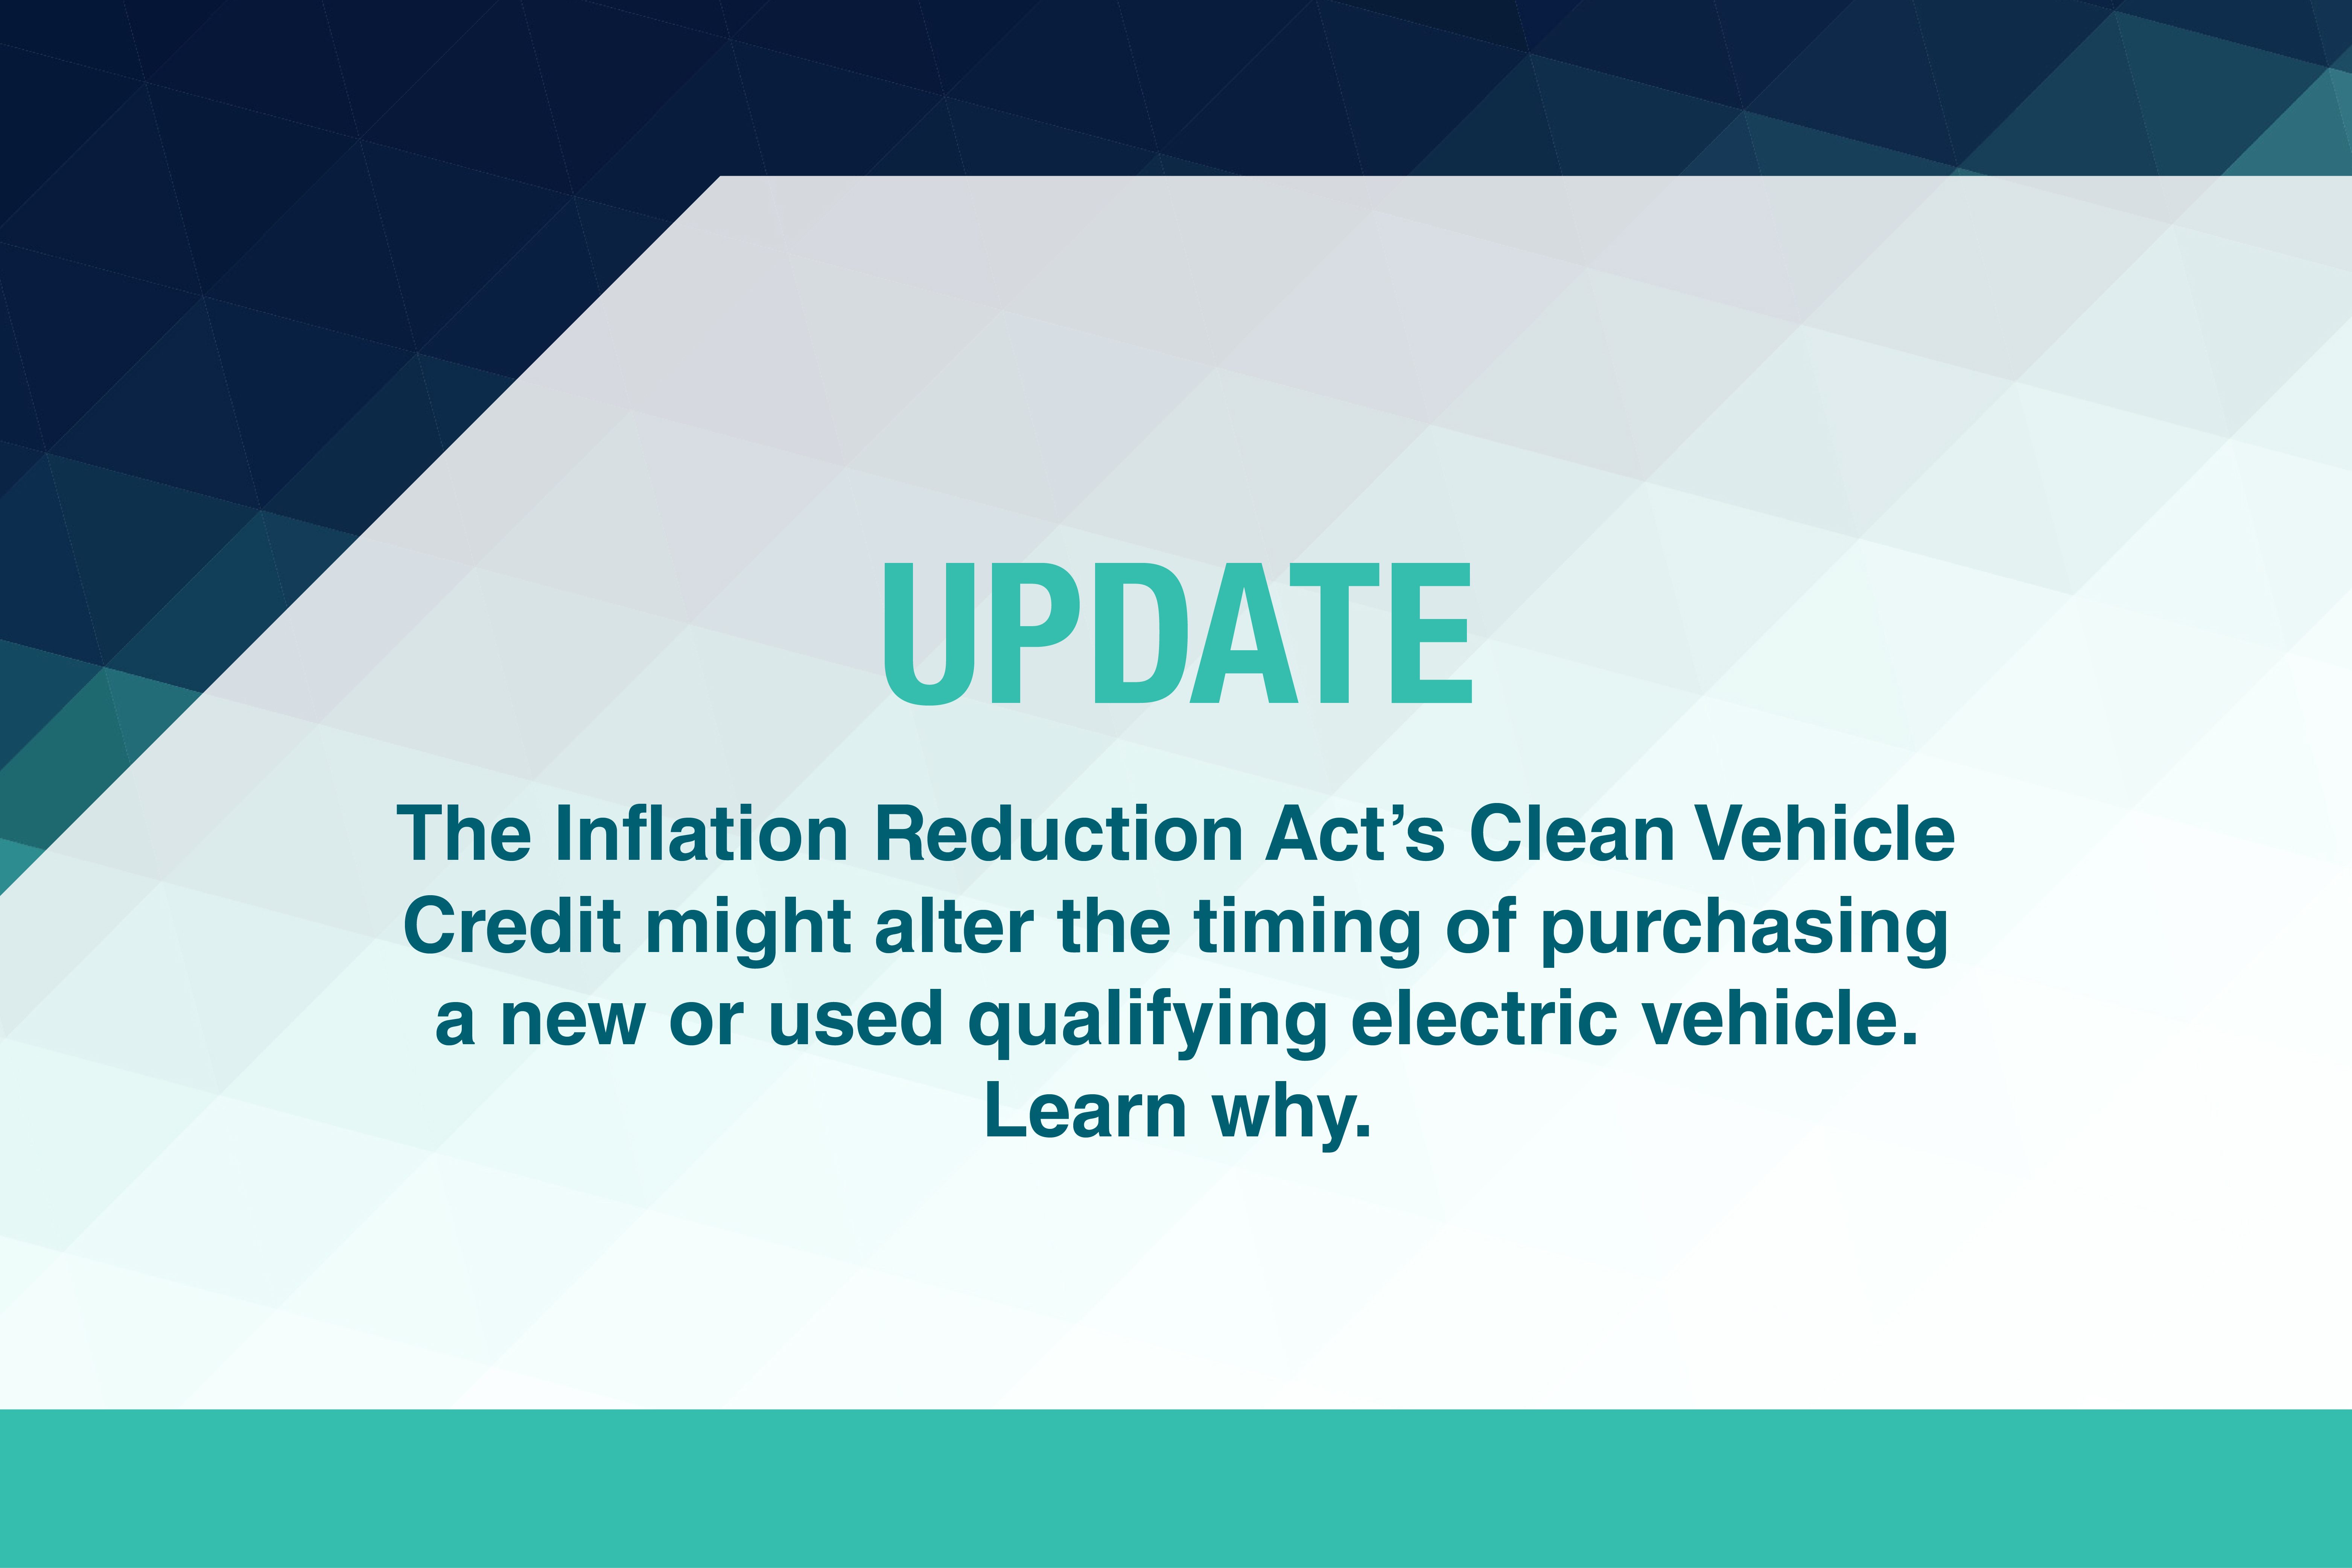 Clean Vehicle Credit comes with caveats